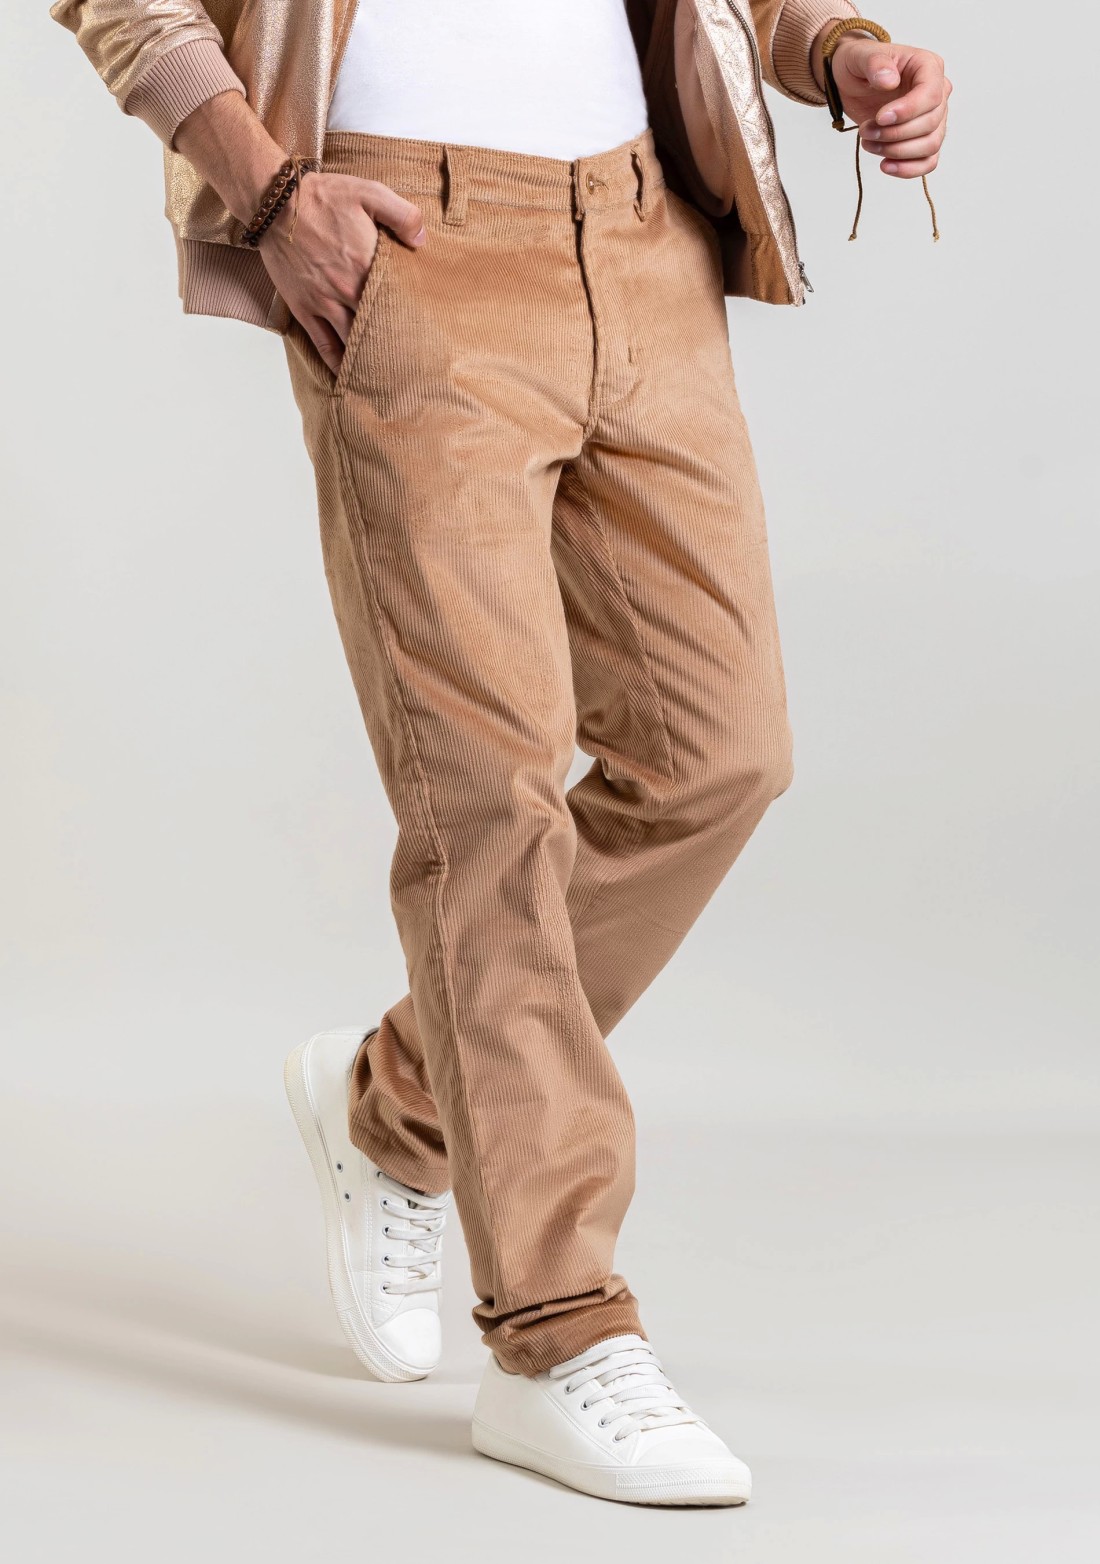 Brown Corduroy Jeans with Corduroy Pants Outfits For Men After 50 (2 ideas  & outfits) | Lookastic